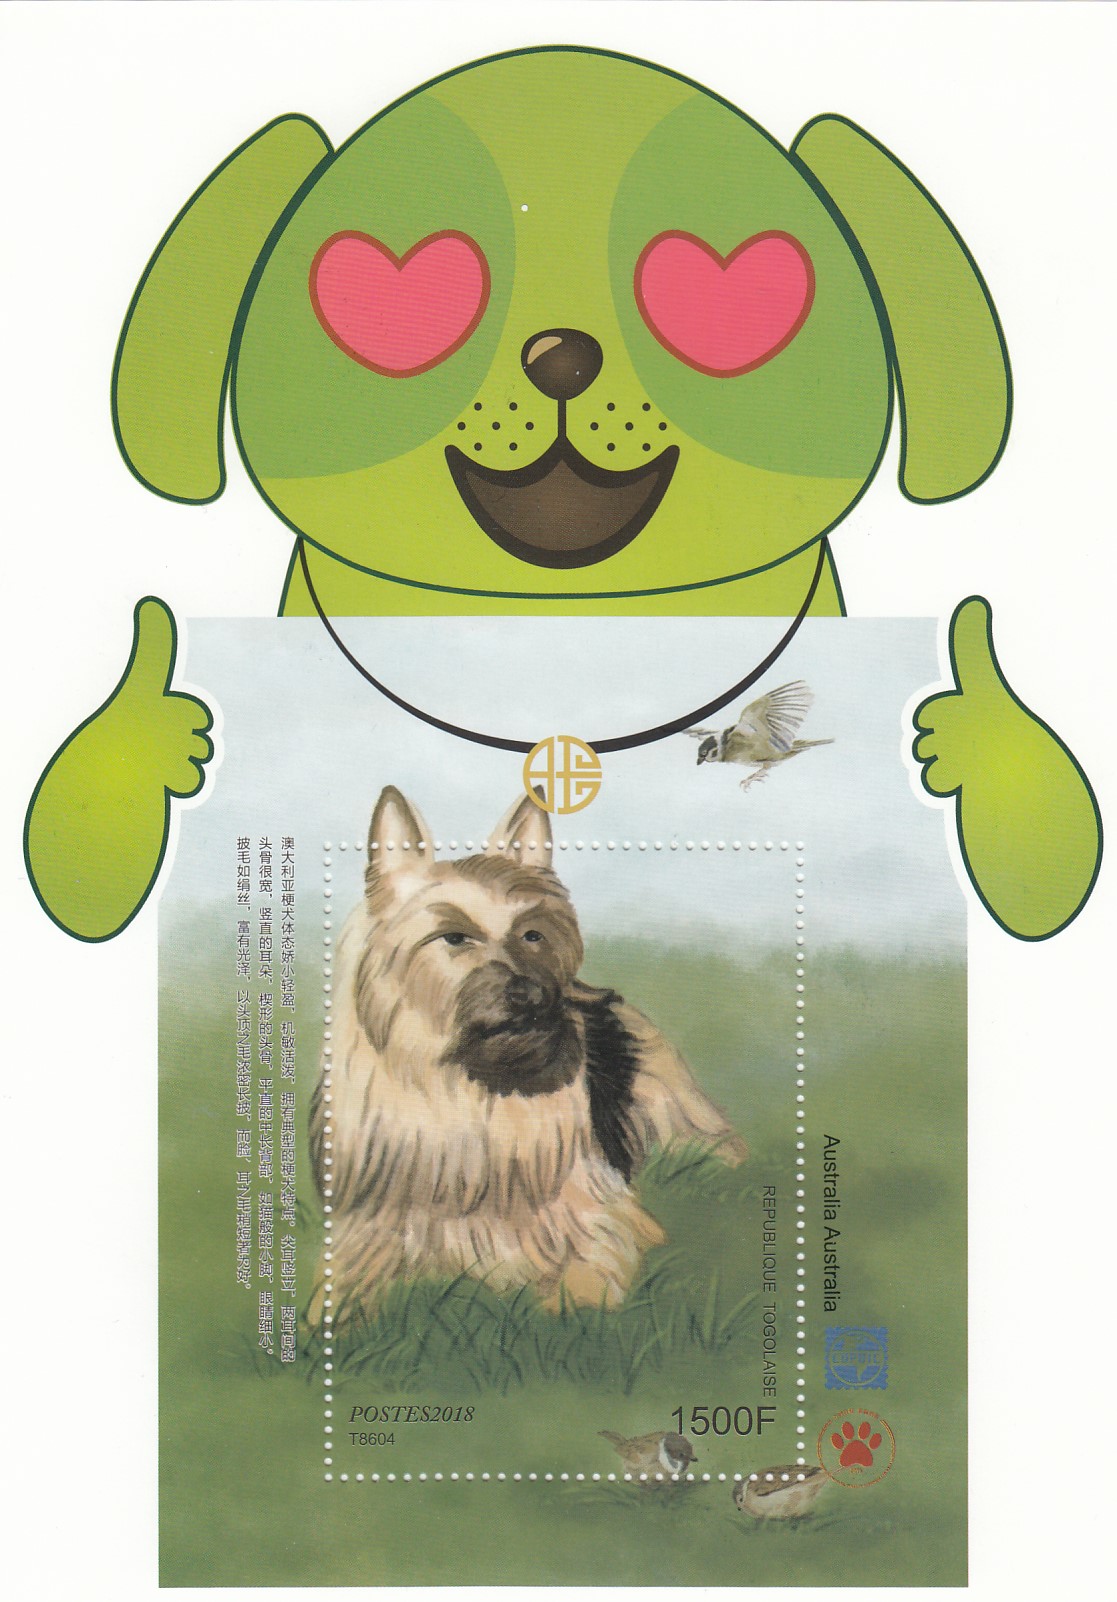 Dogs - Issue of Togo postage stamps